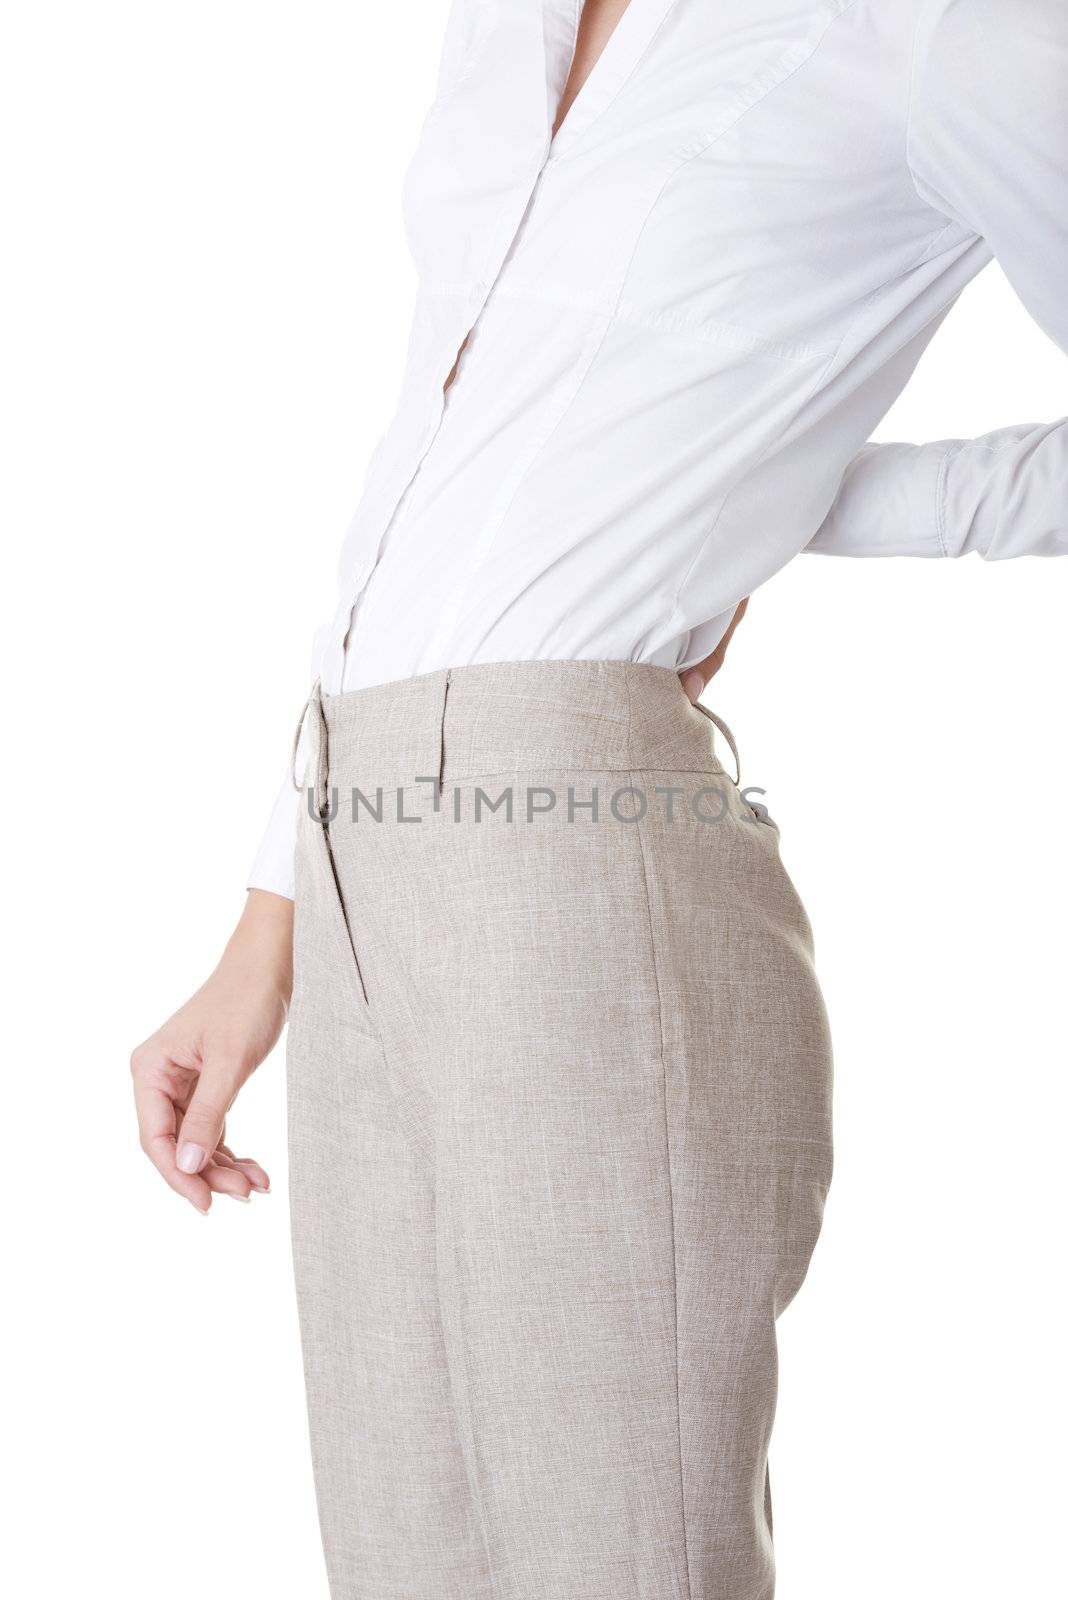 Woman with back pain holding her aching hip